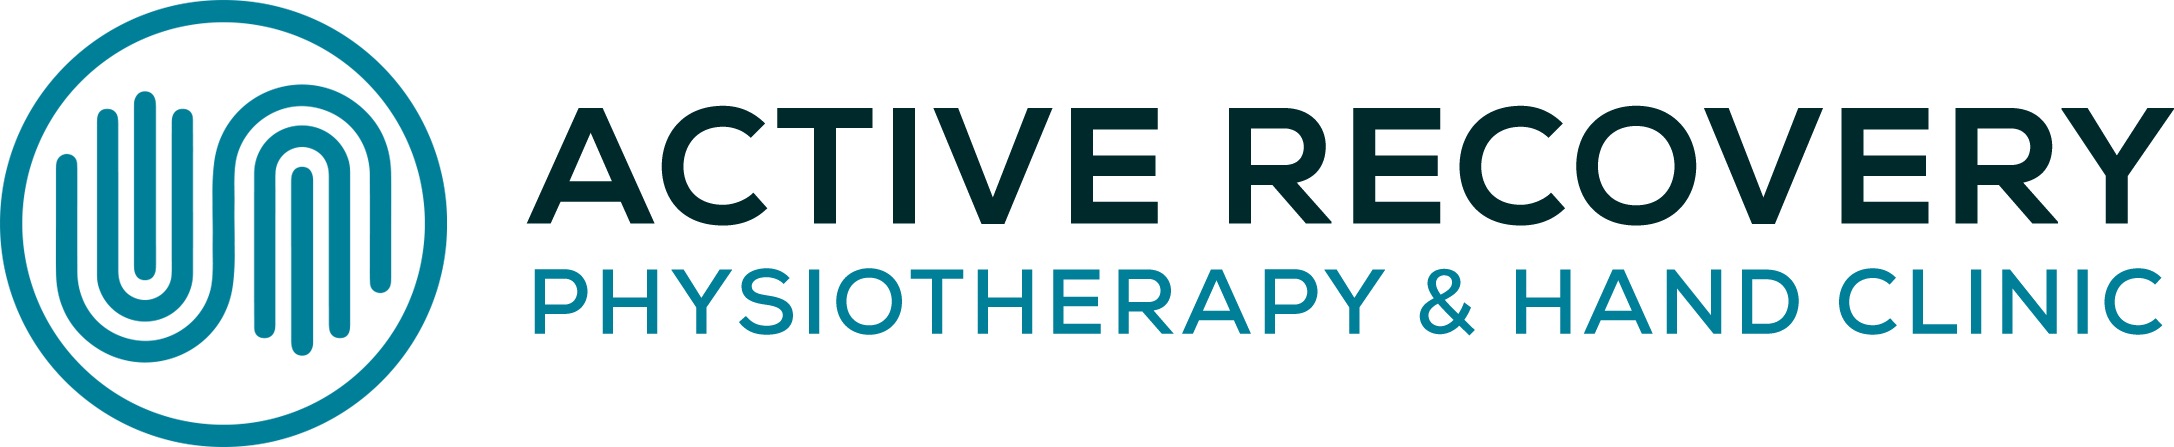 Active Recovery Physiotherapy & Hand Clinic